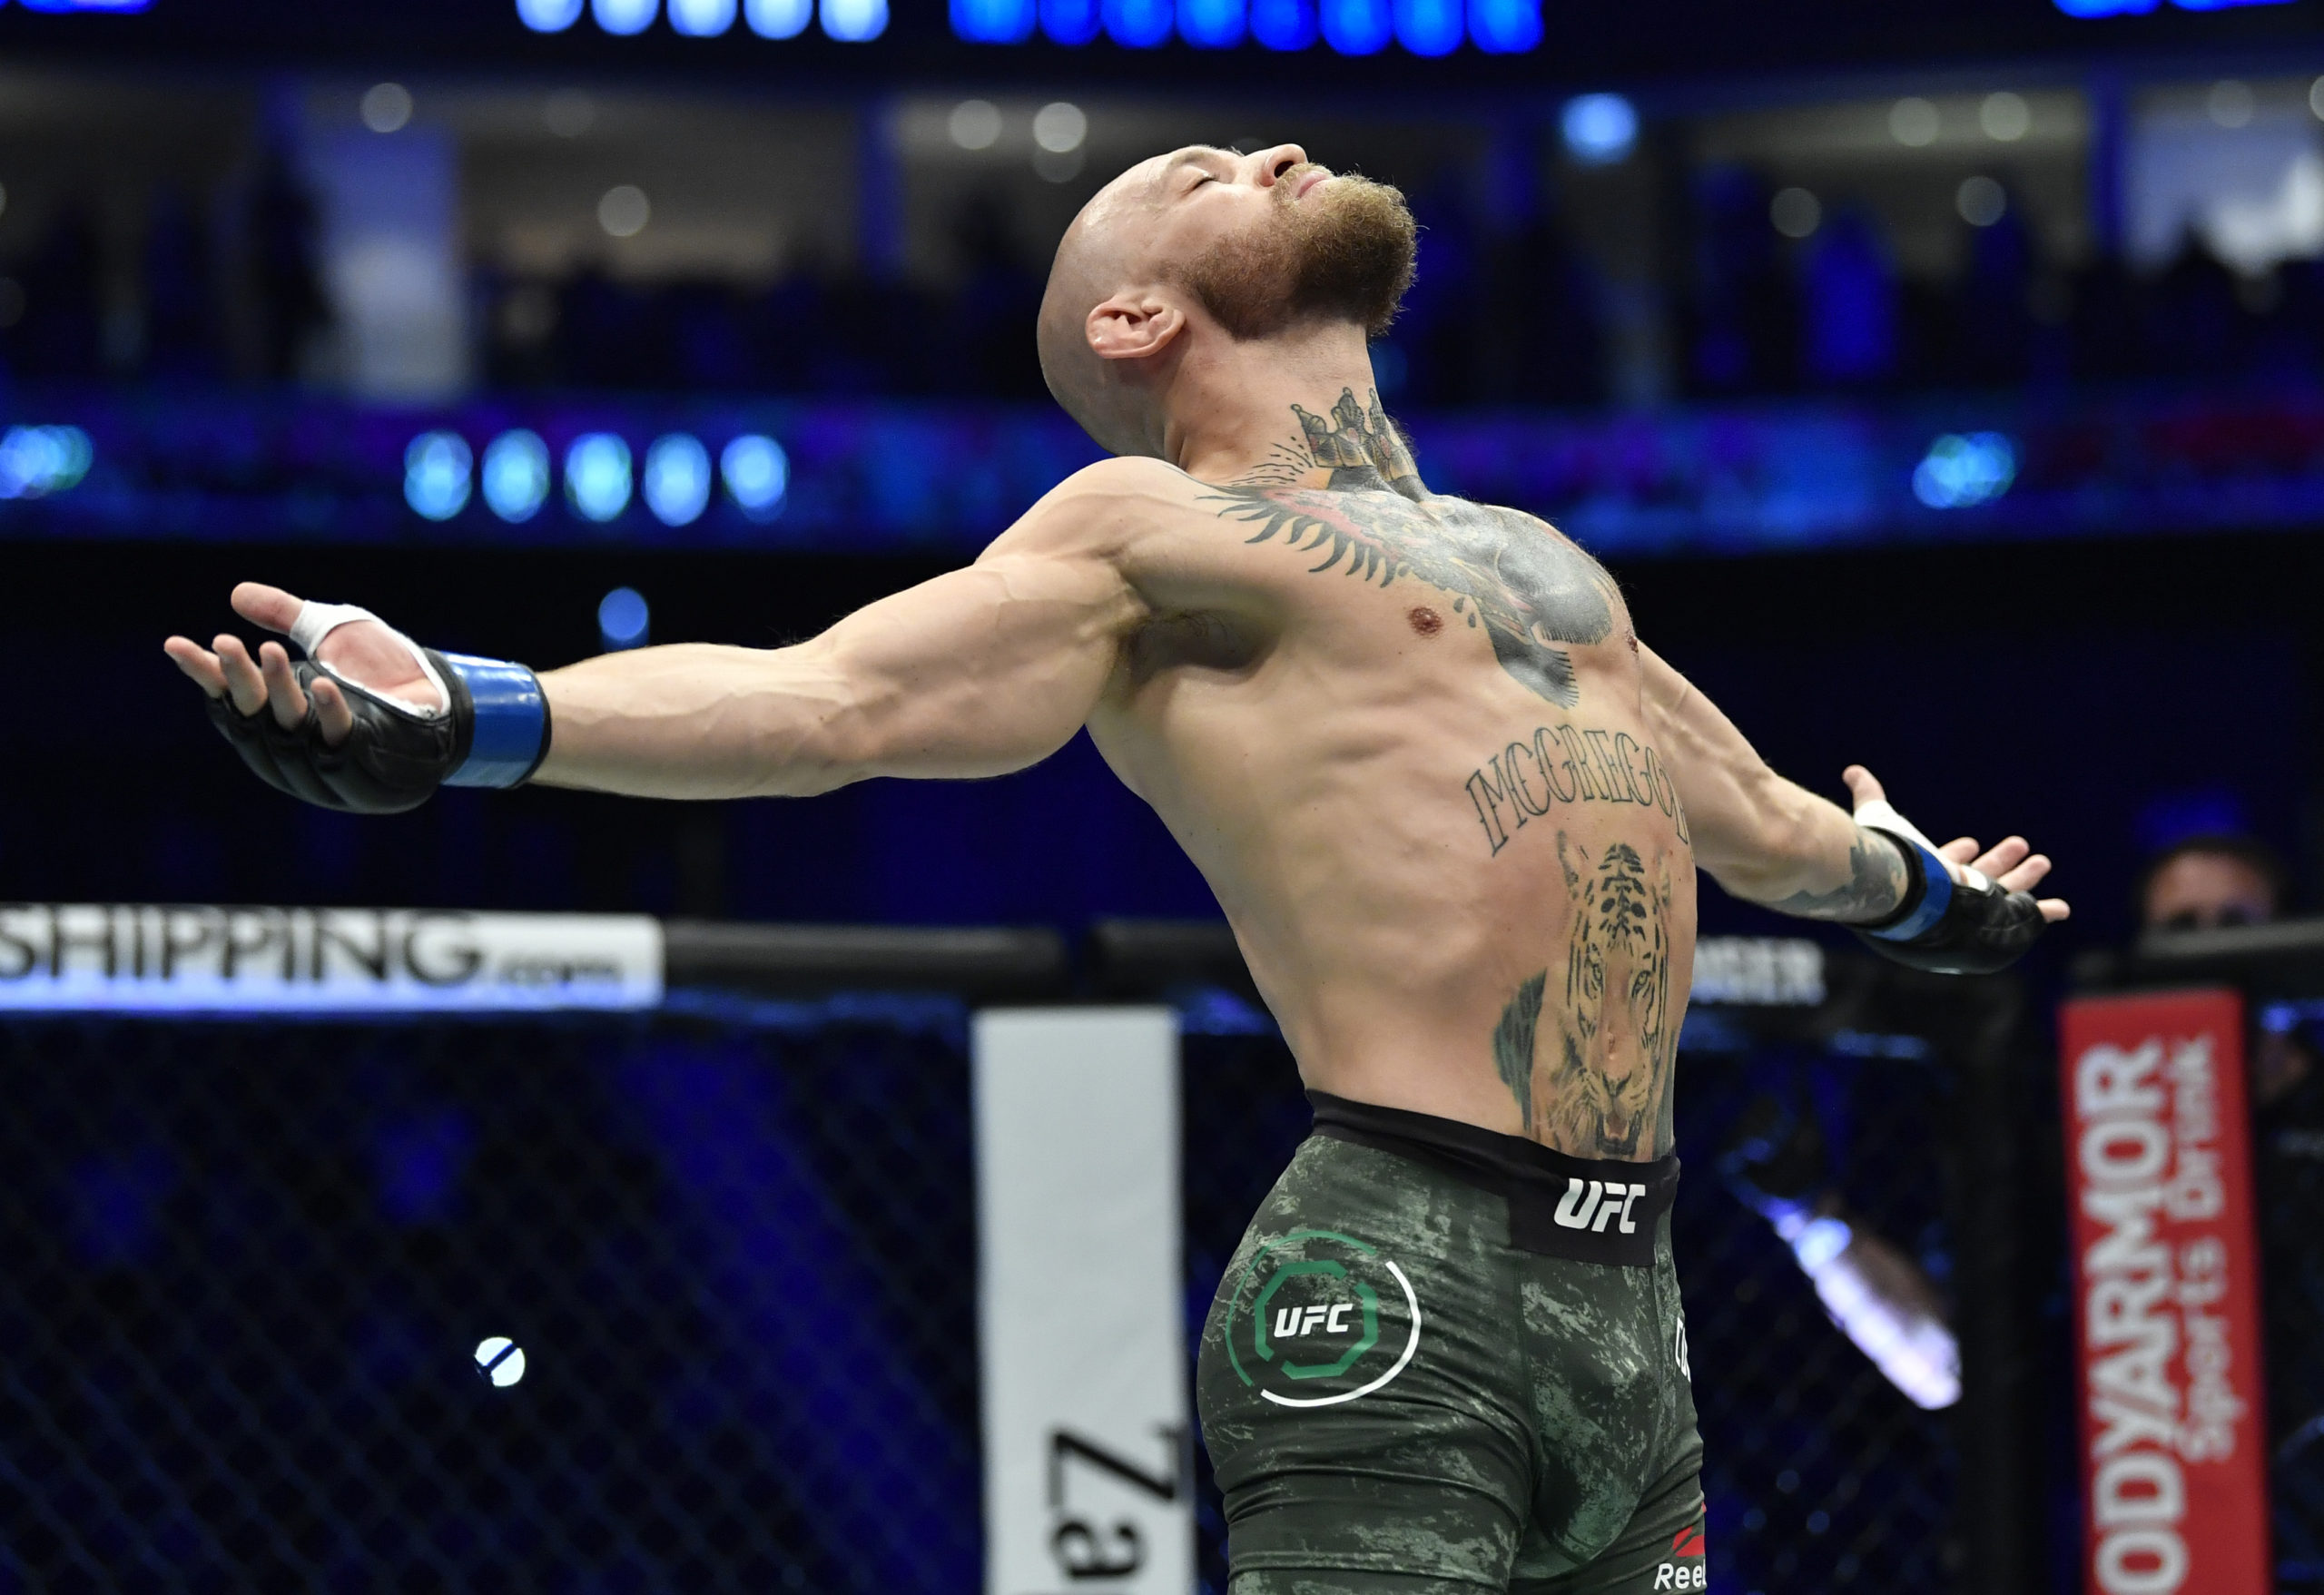 Conor McGregor was interested in purchasing shares in Celtic